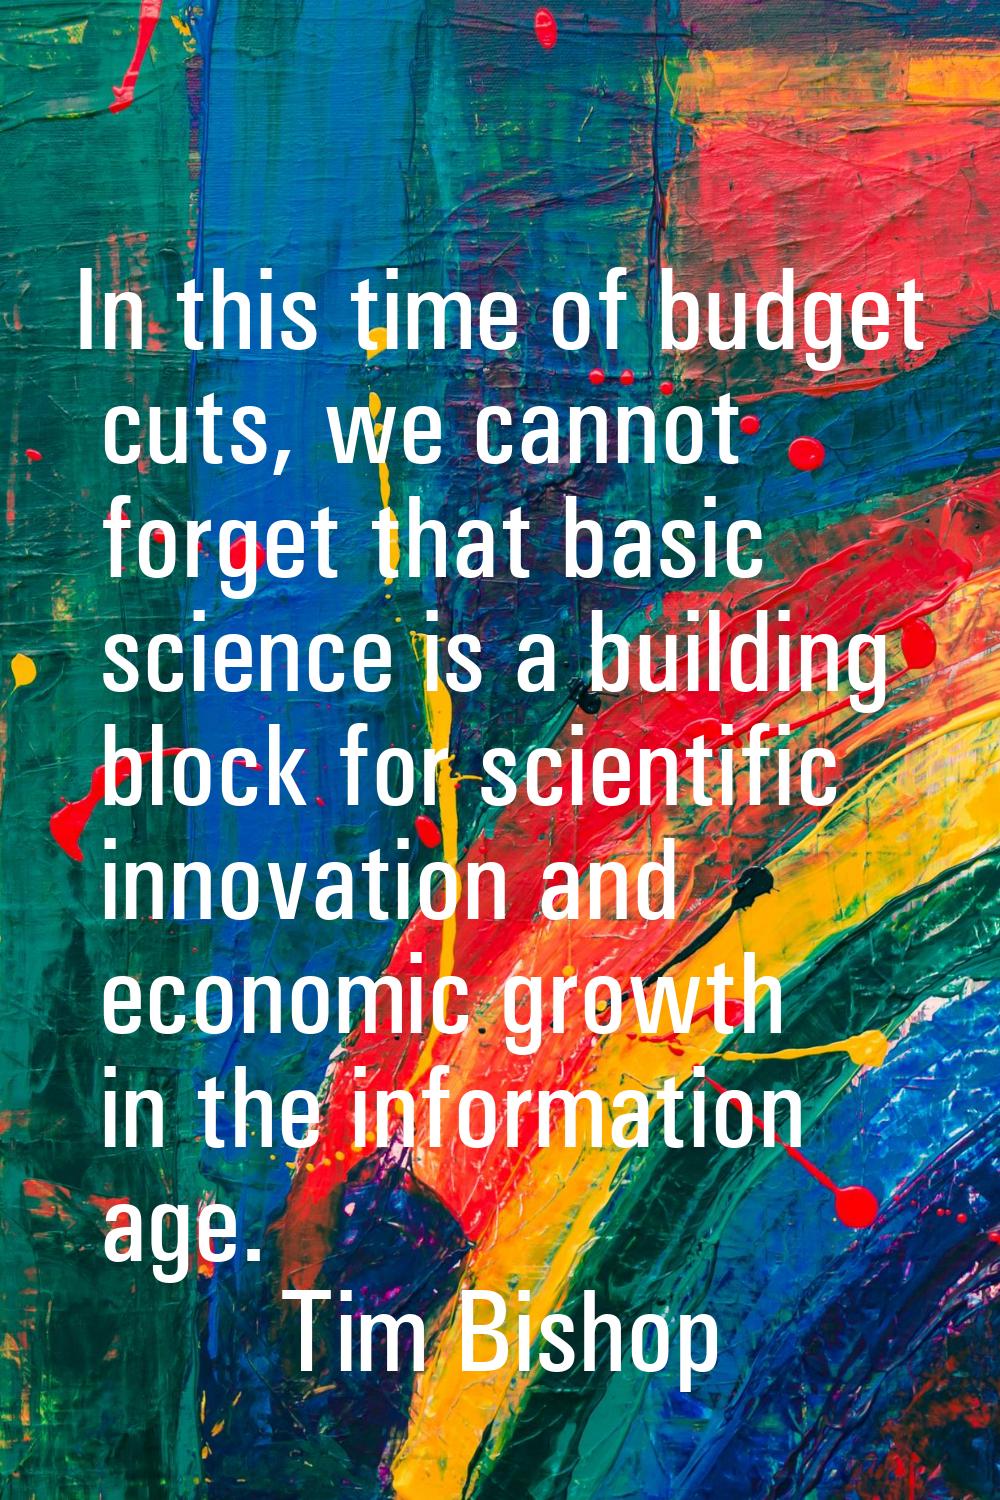 In this time of budget cuts, we cannot forget that basic science is a building block for scientific